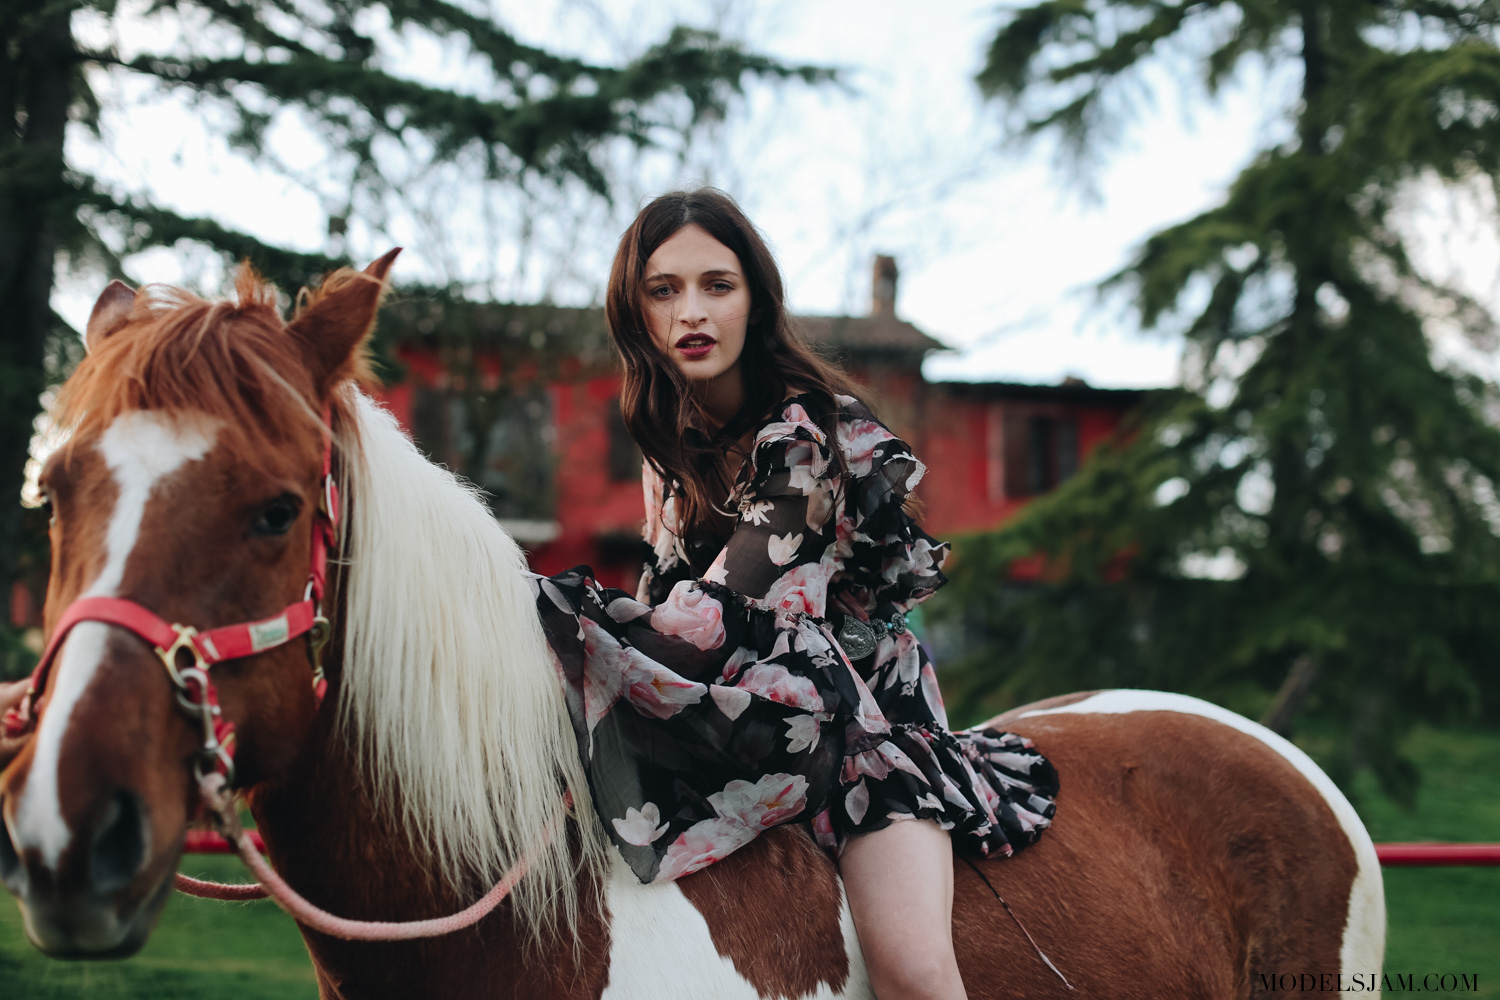 Benedetta Casaluce is photographed by Pier Grassano and styled by Angelica Ardasheva wearing Redemption silk dress for Models Jam editorial Spirit sauvage on horse